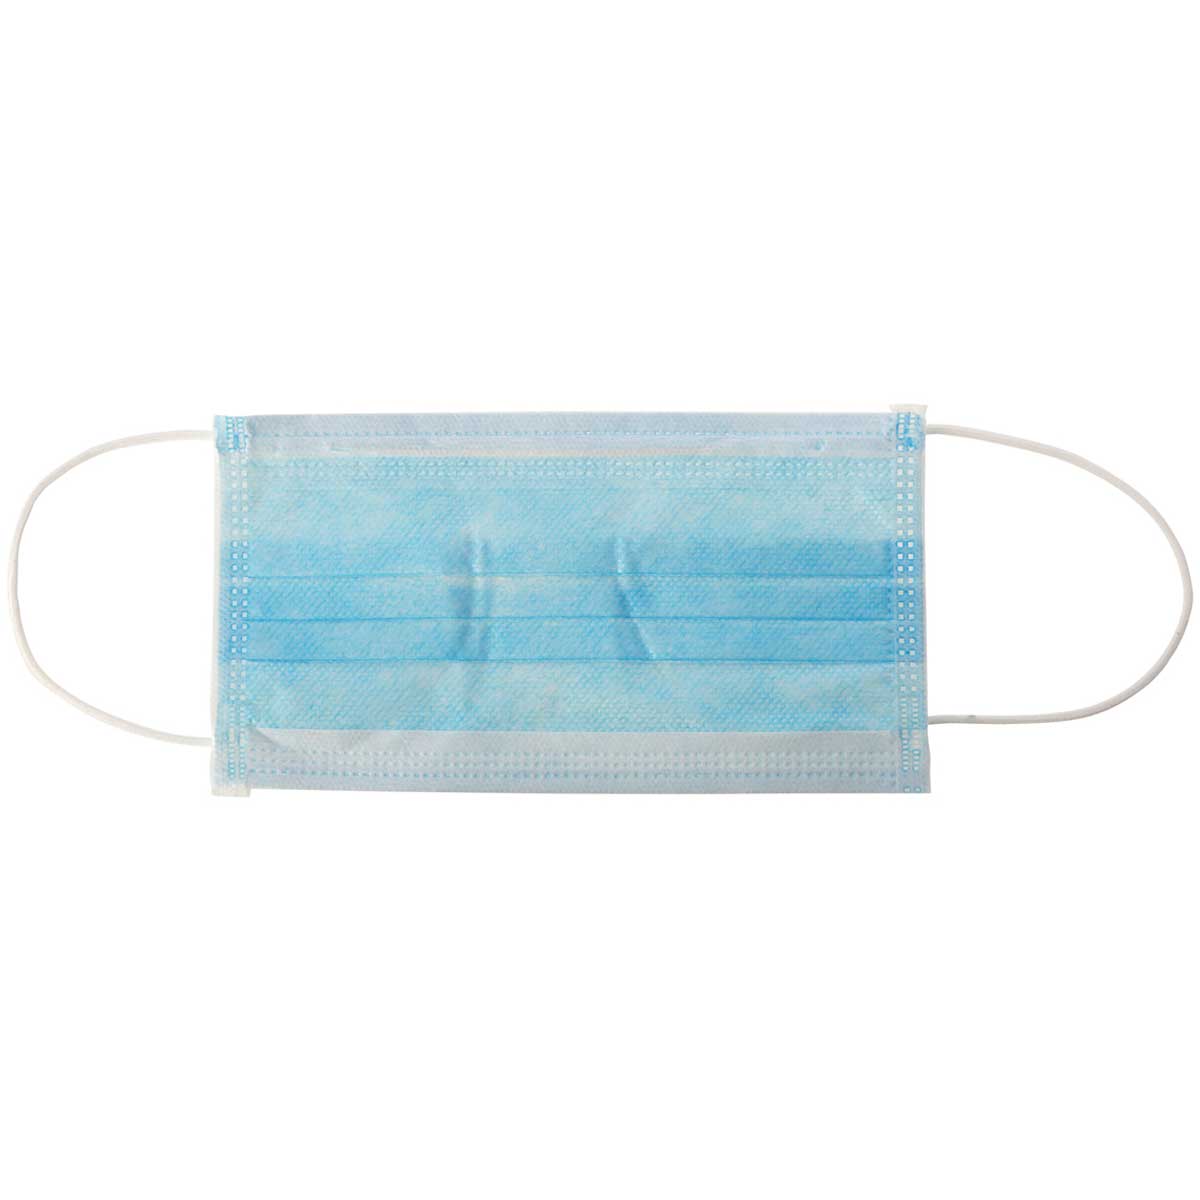 50x Disposable Face Mask